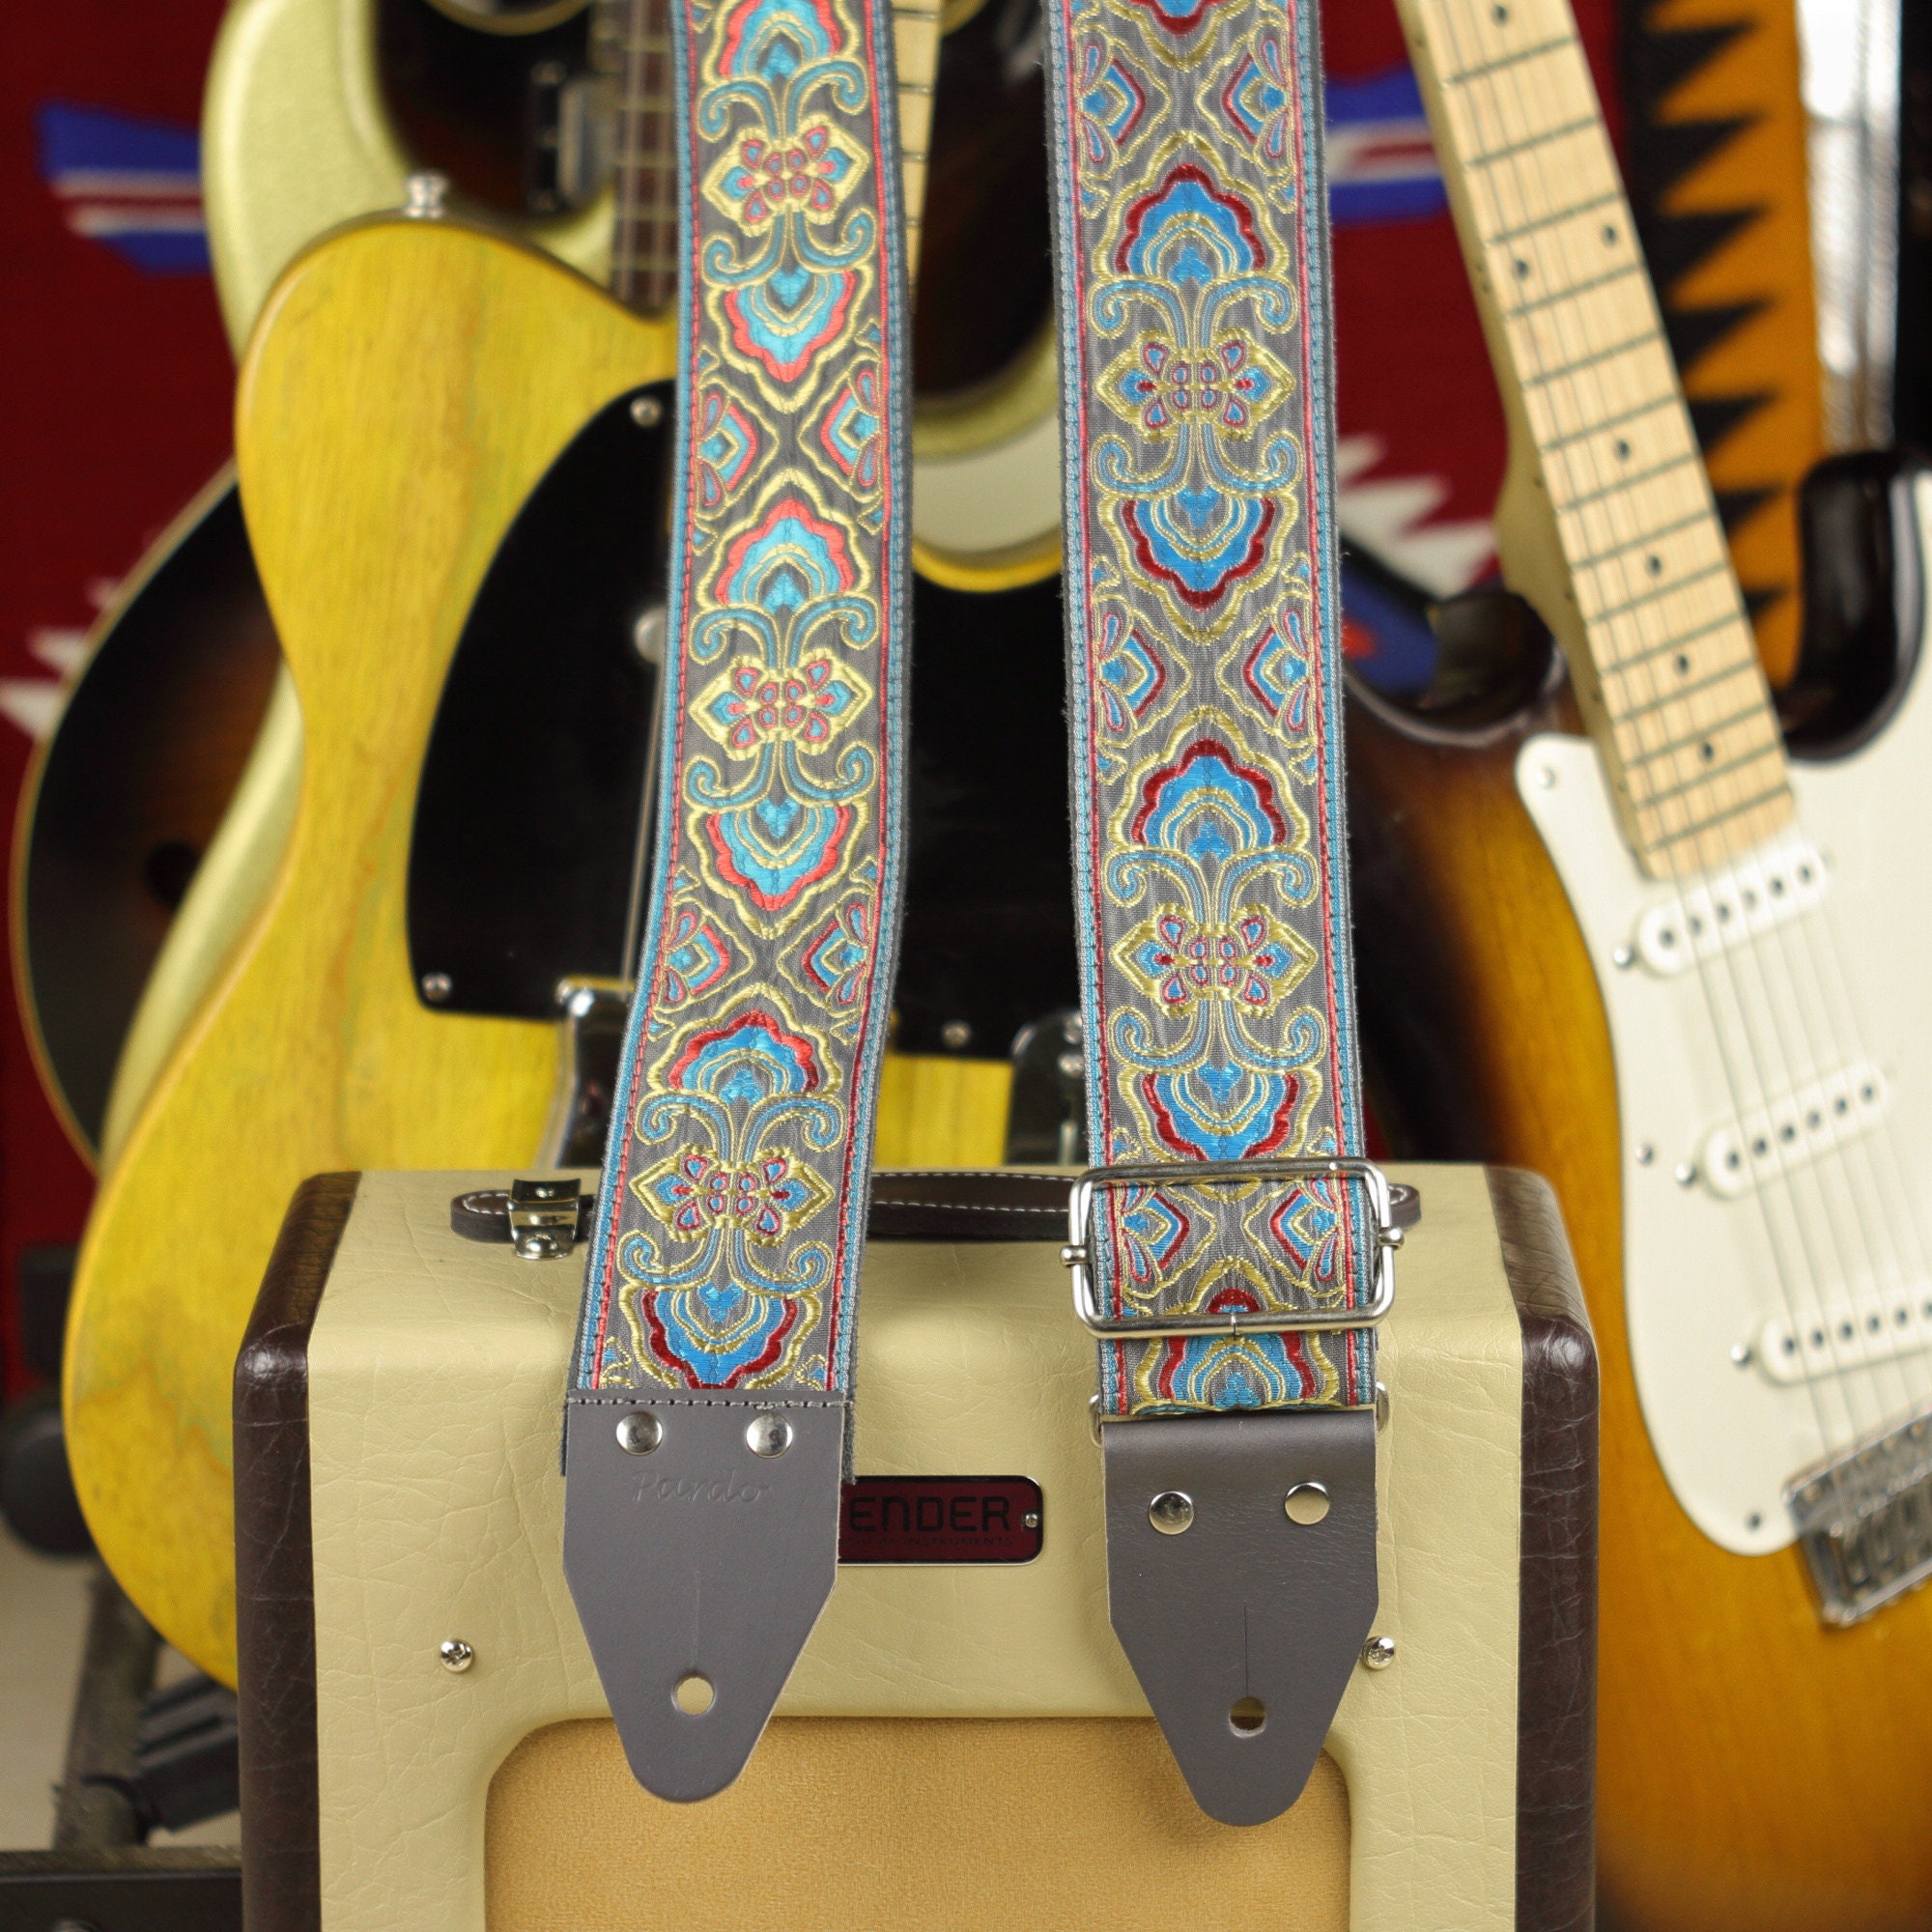 Perri's 2 Faux Snake Guitar Strap White and Black 2 in.